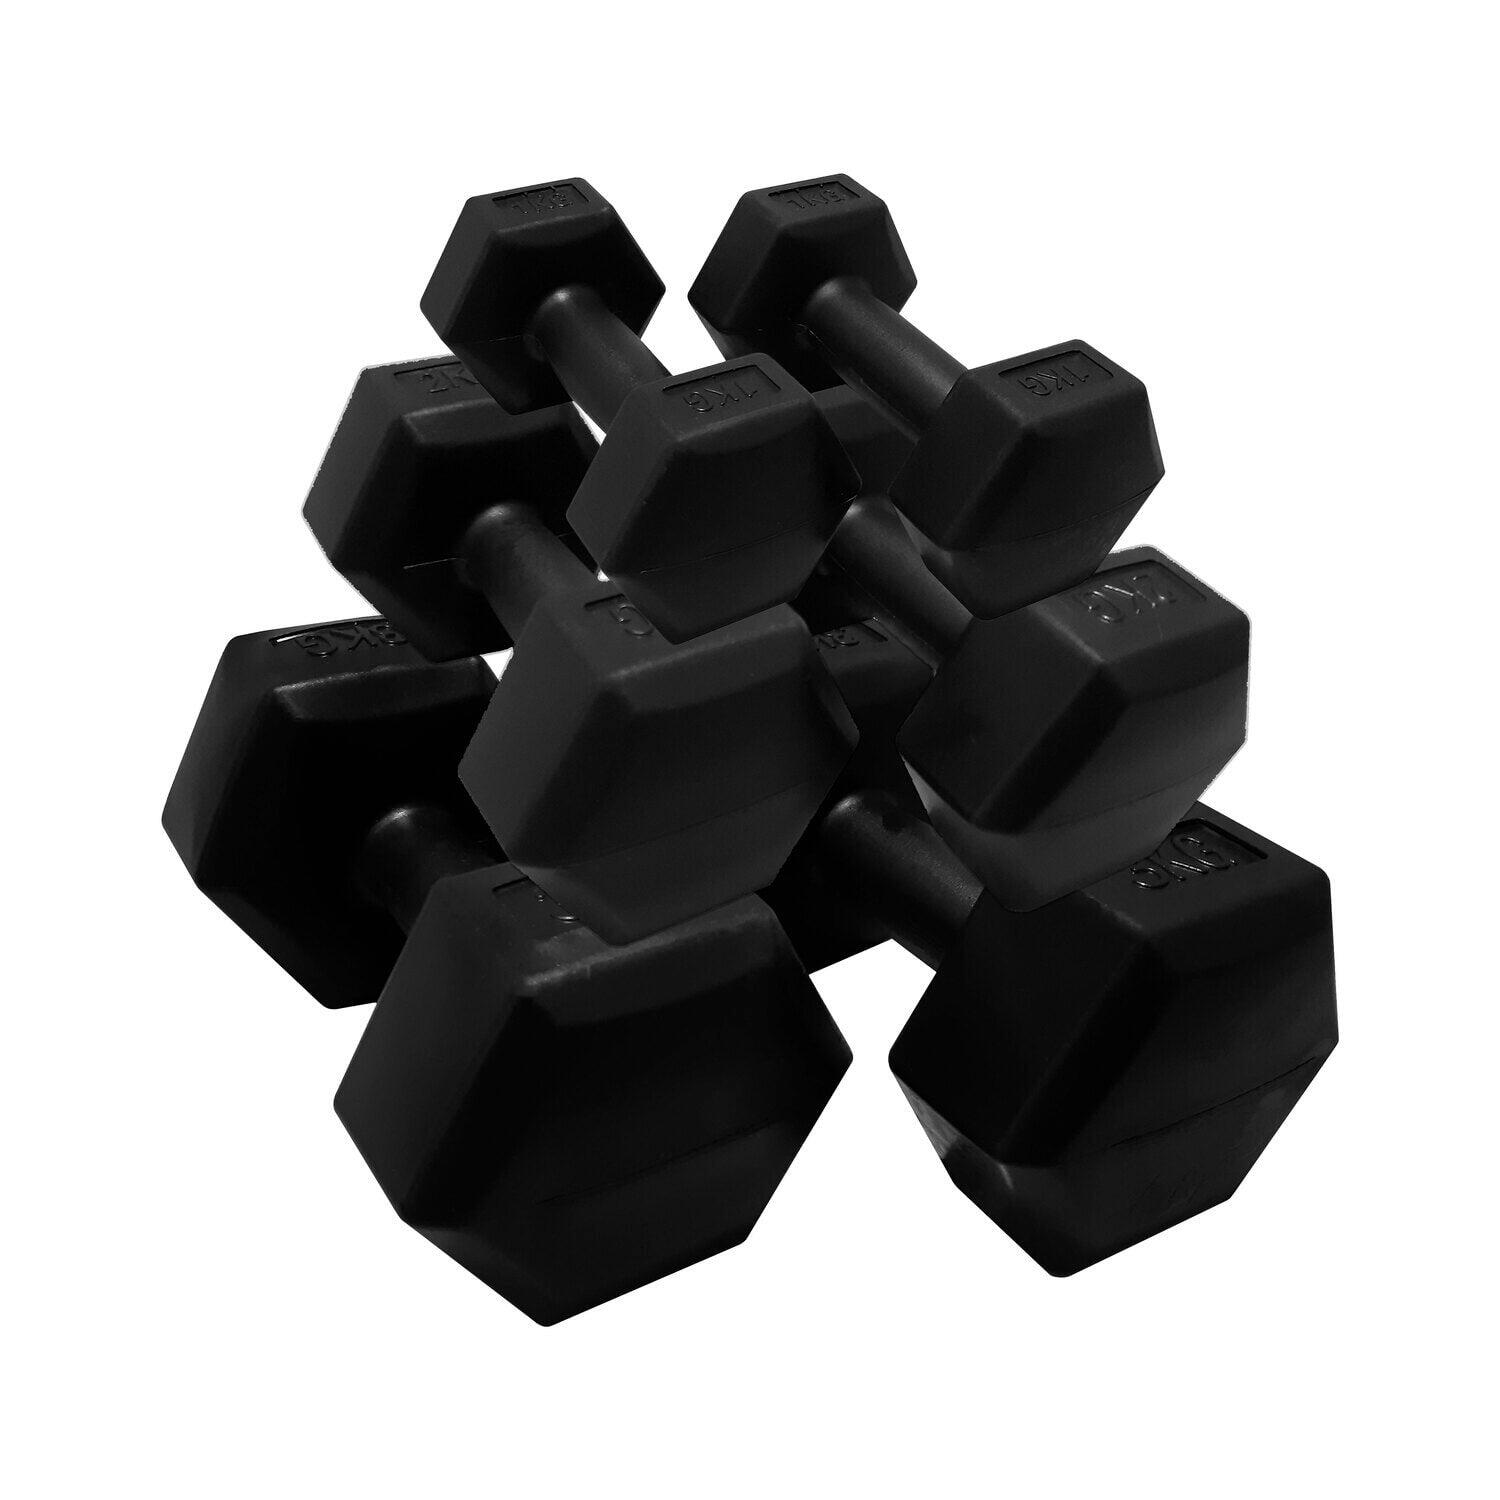 HXGN HXGN 12kg Hex Dumbbell Weight Set